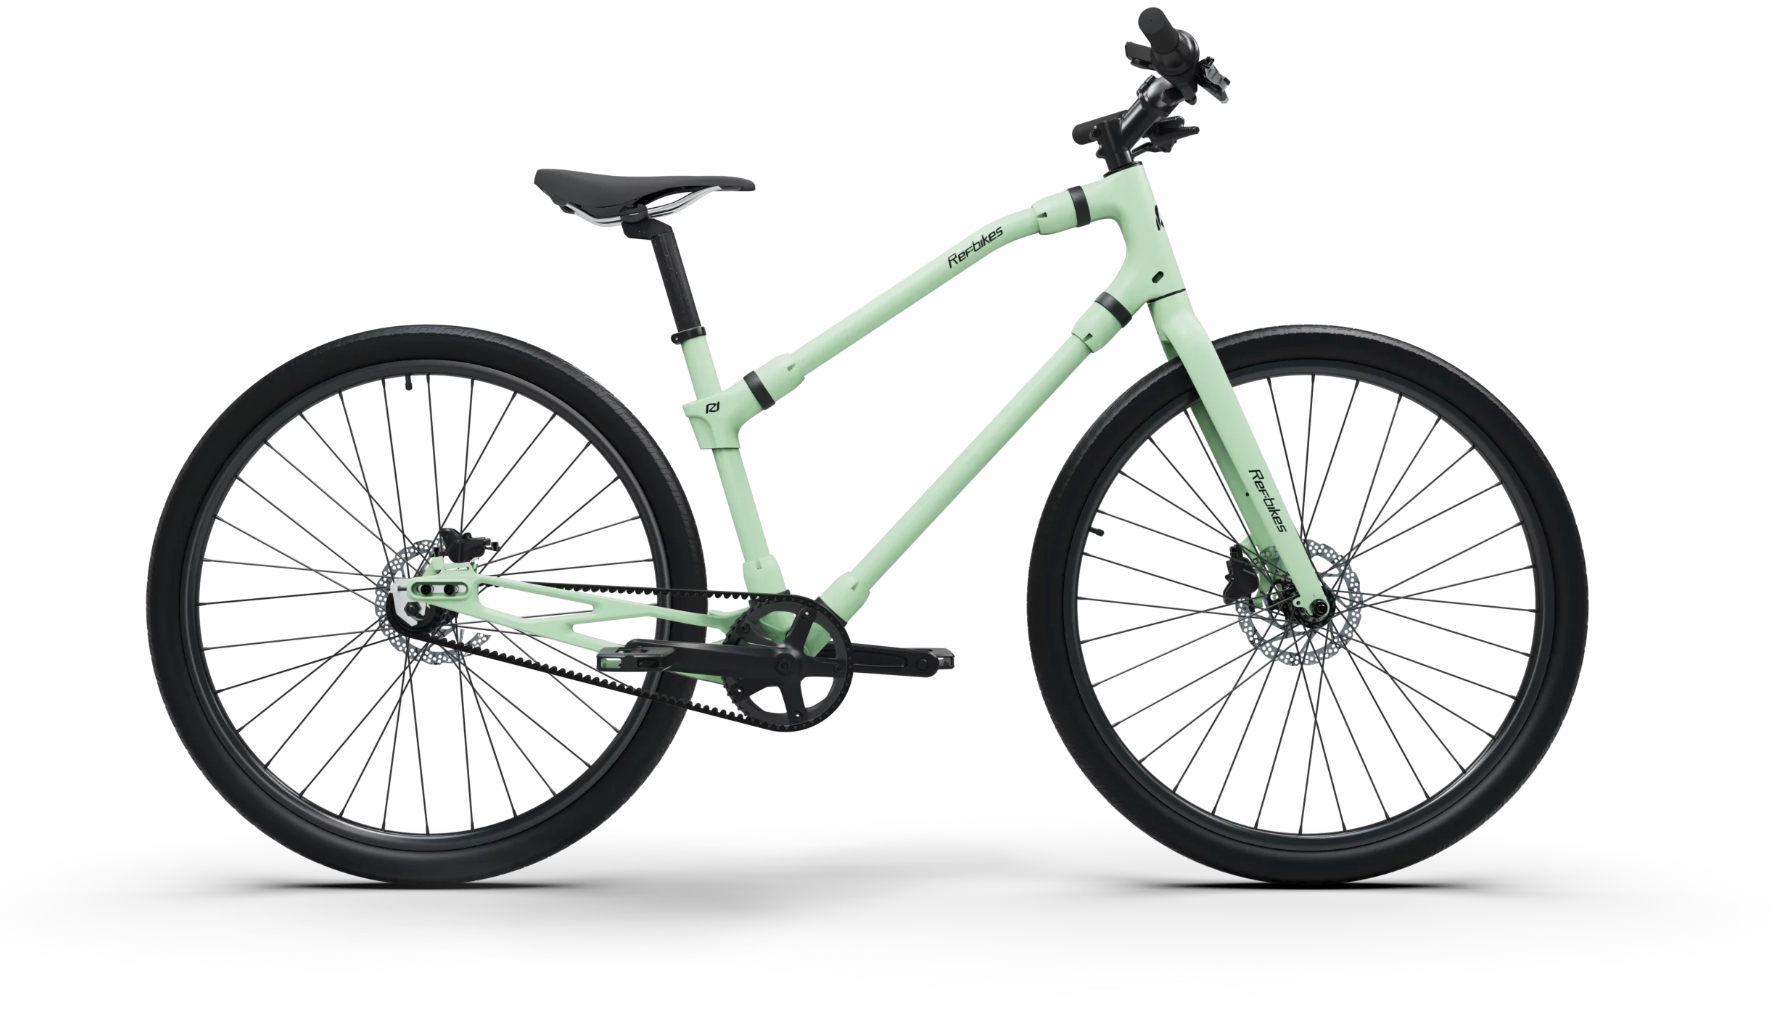 Mint green Ref Essential bike, combining modern aesthetics with sustainable transportation for an active lifestyle.